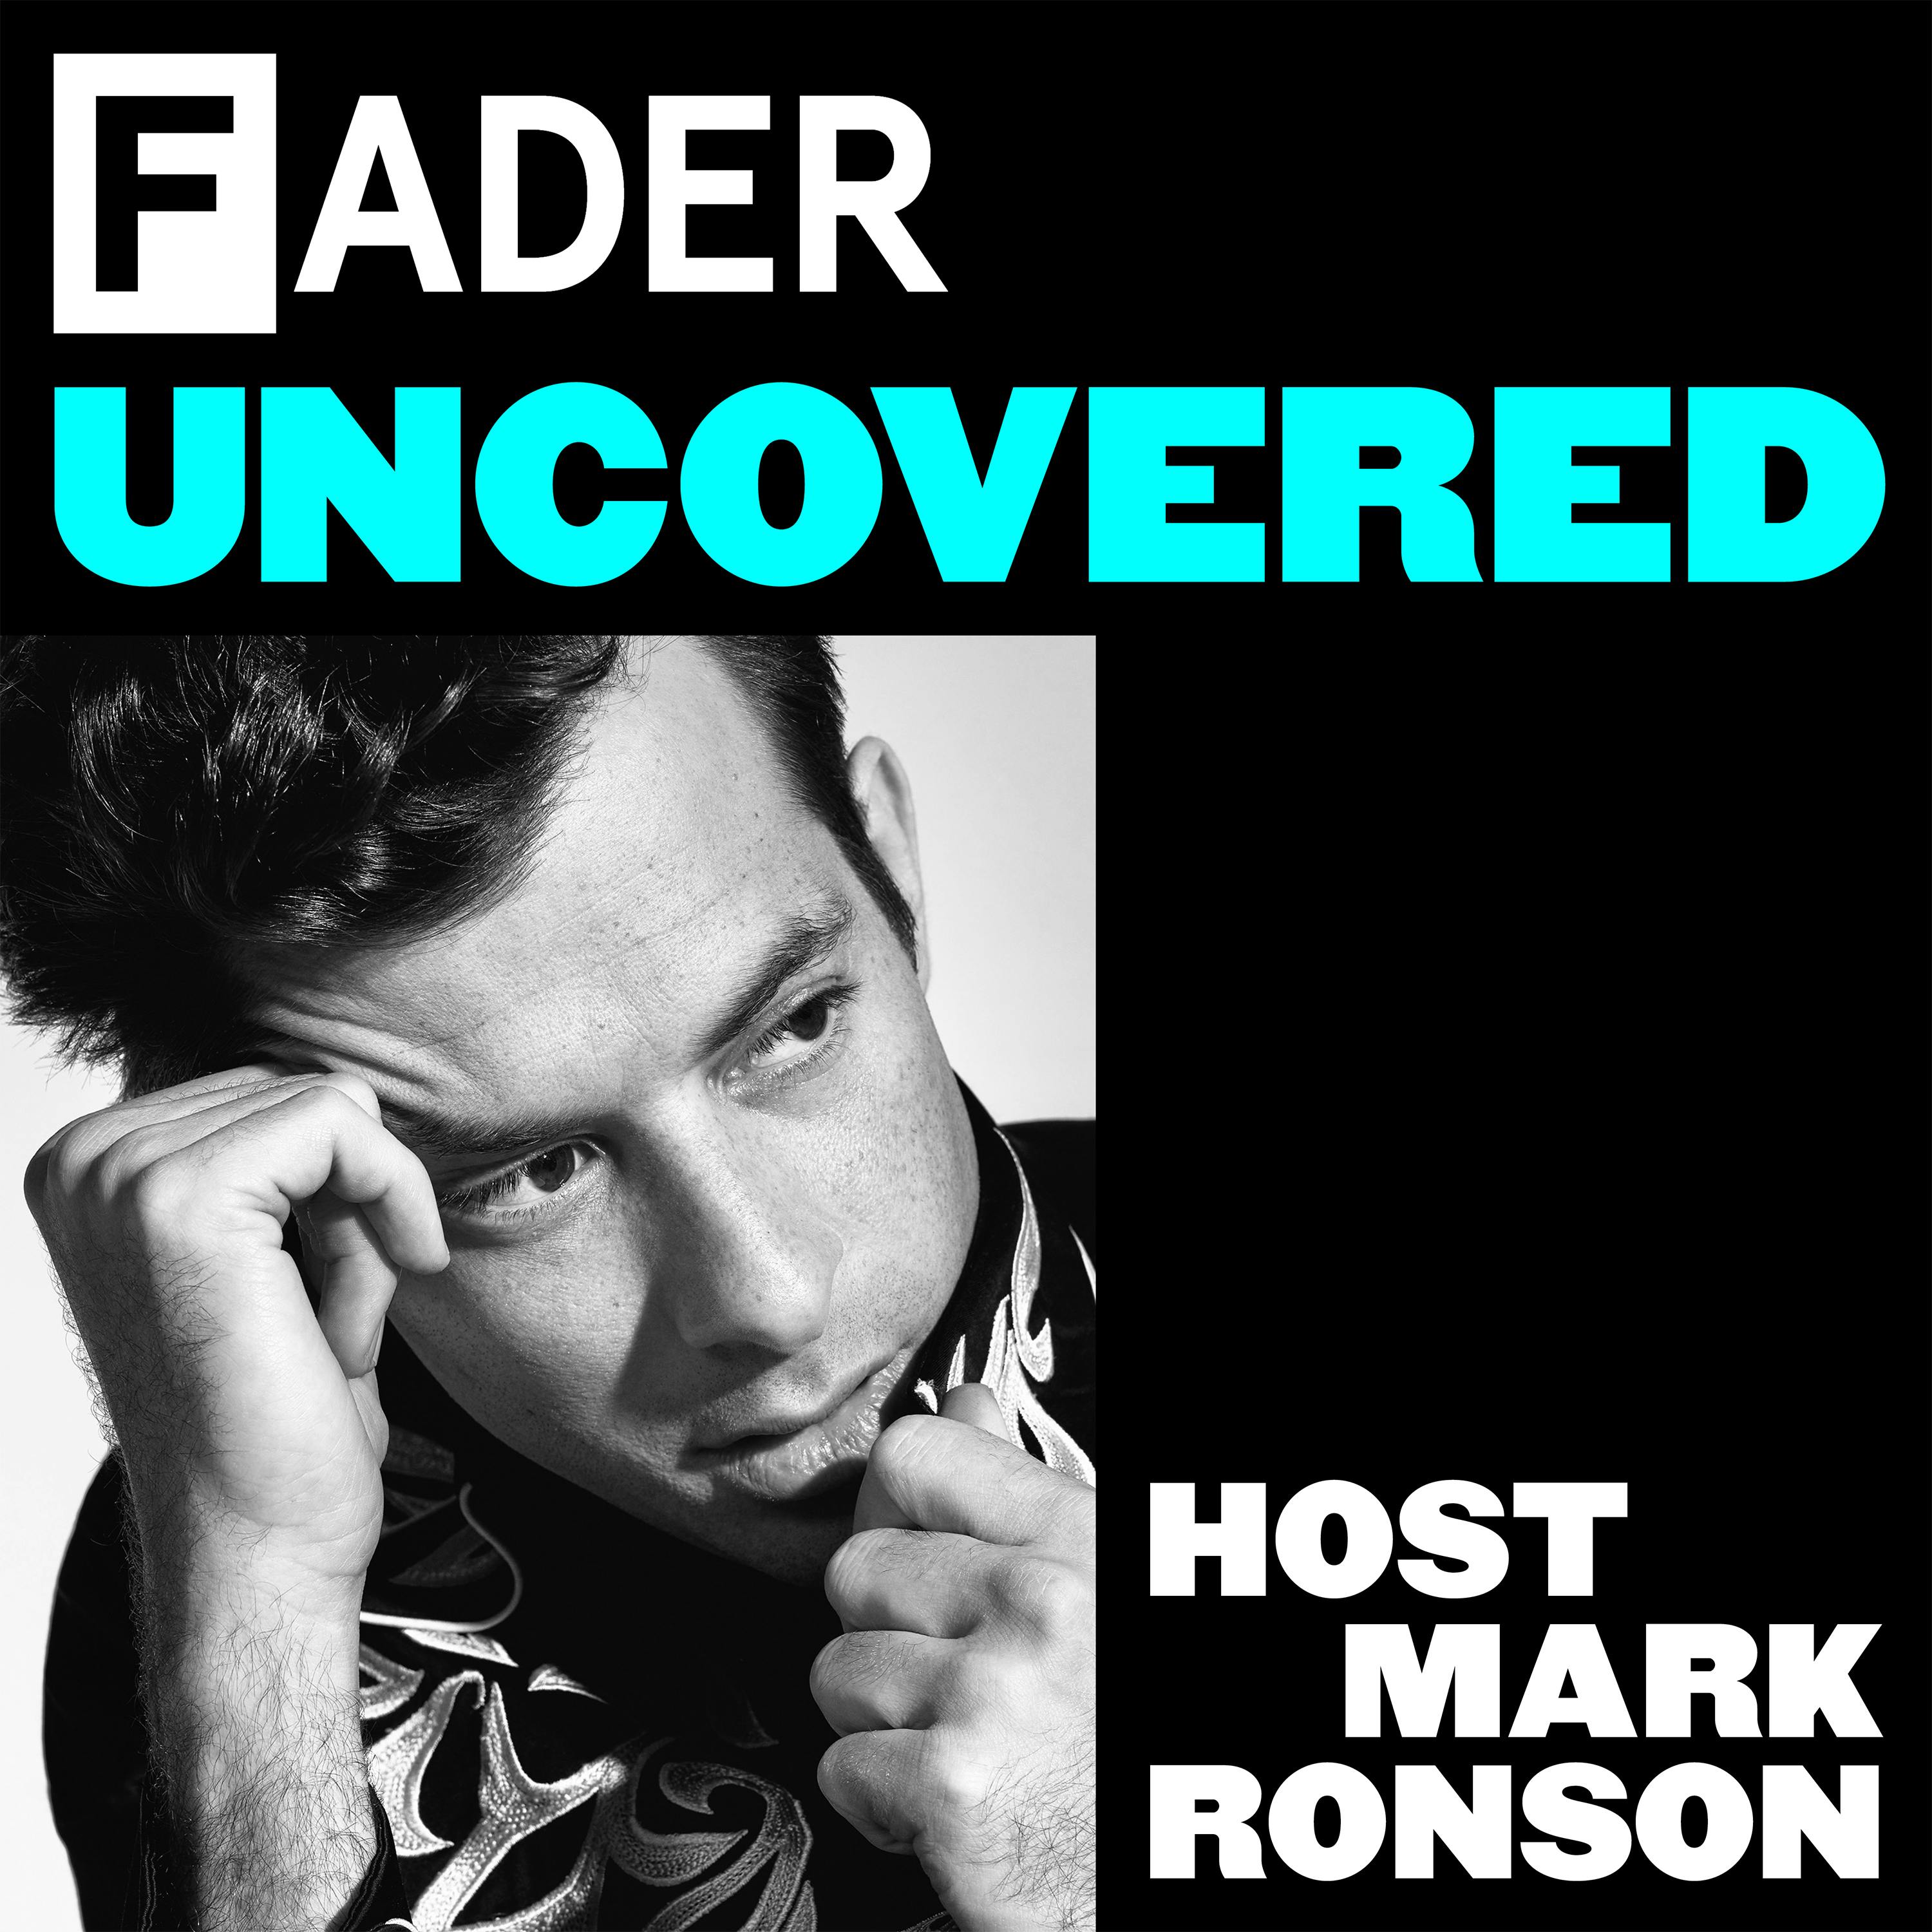 The FADER Uncovered podcast show image